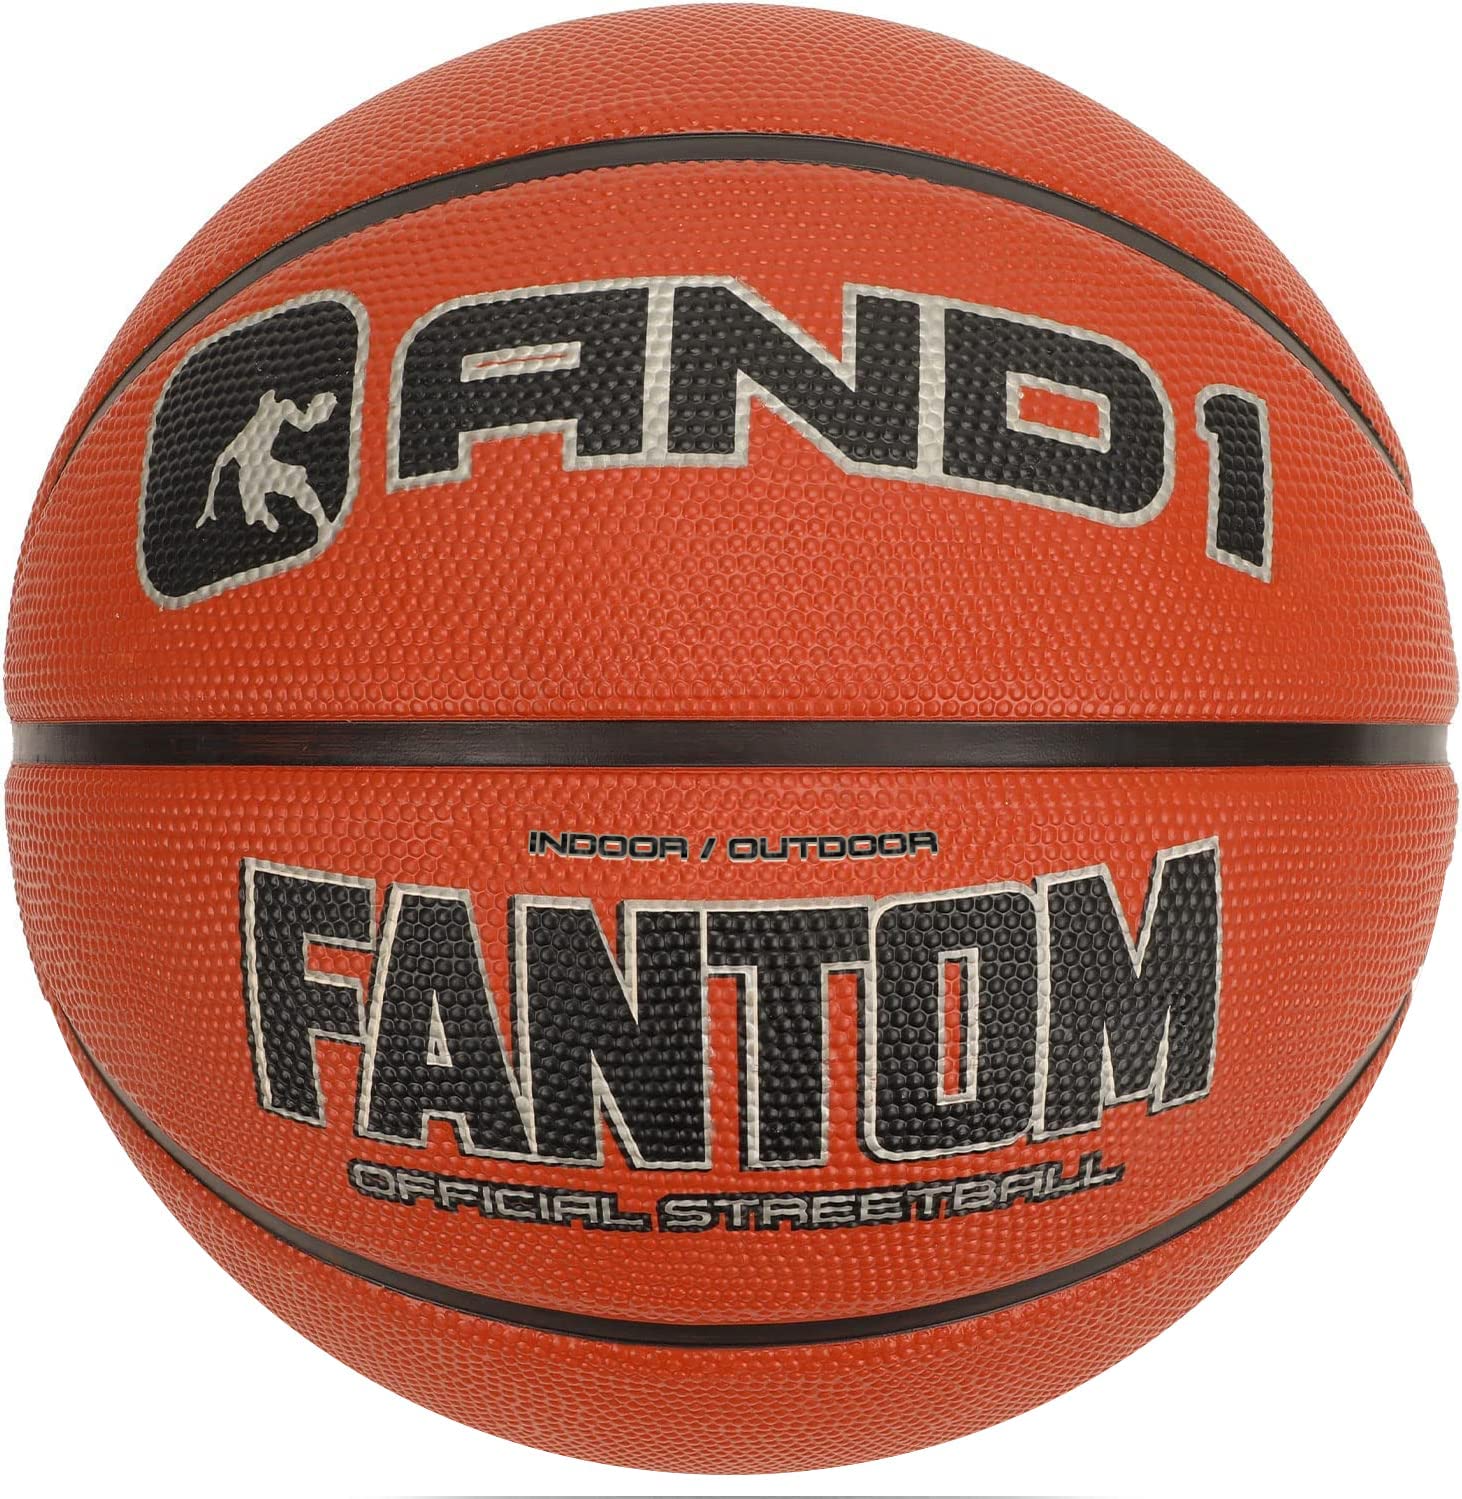 AND1 Fantom Rubber Basketball amazon deal